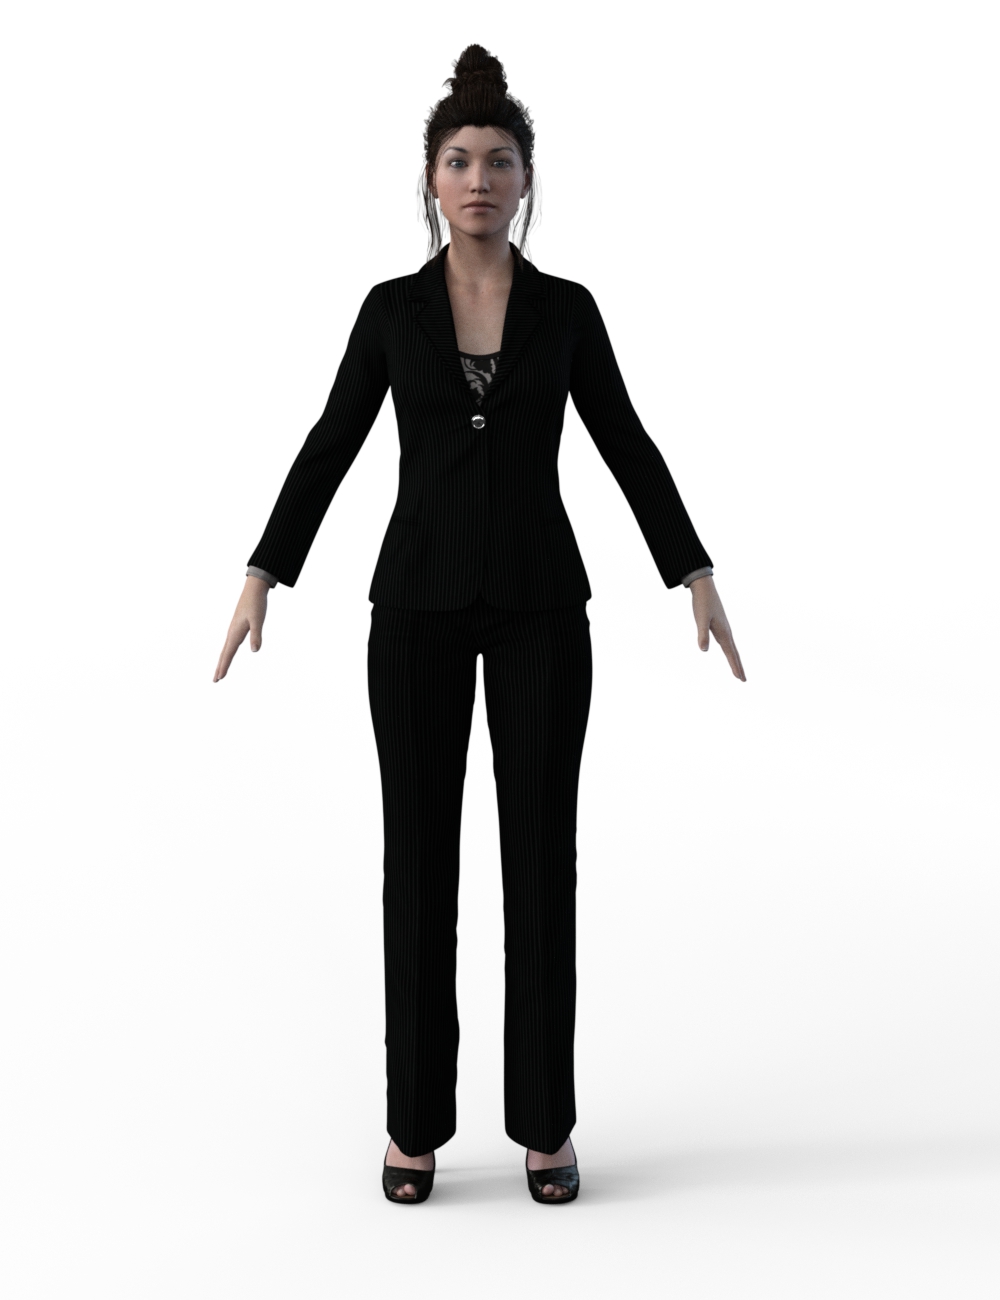 FBX- Base Female New York Business Outfit by: Paleo, 3D Models by Daz 3D